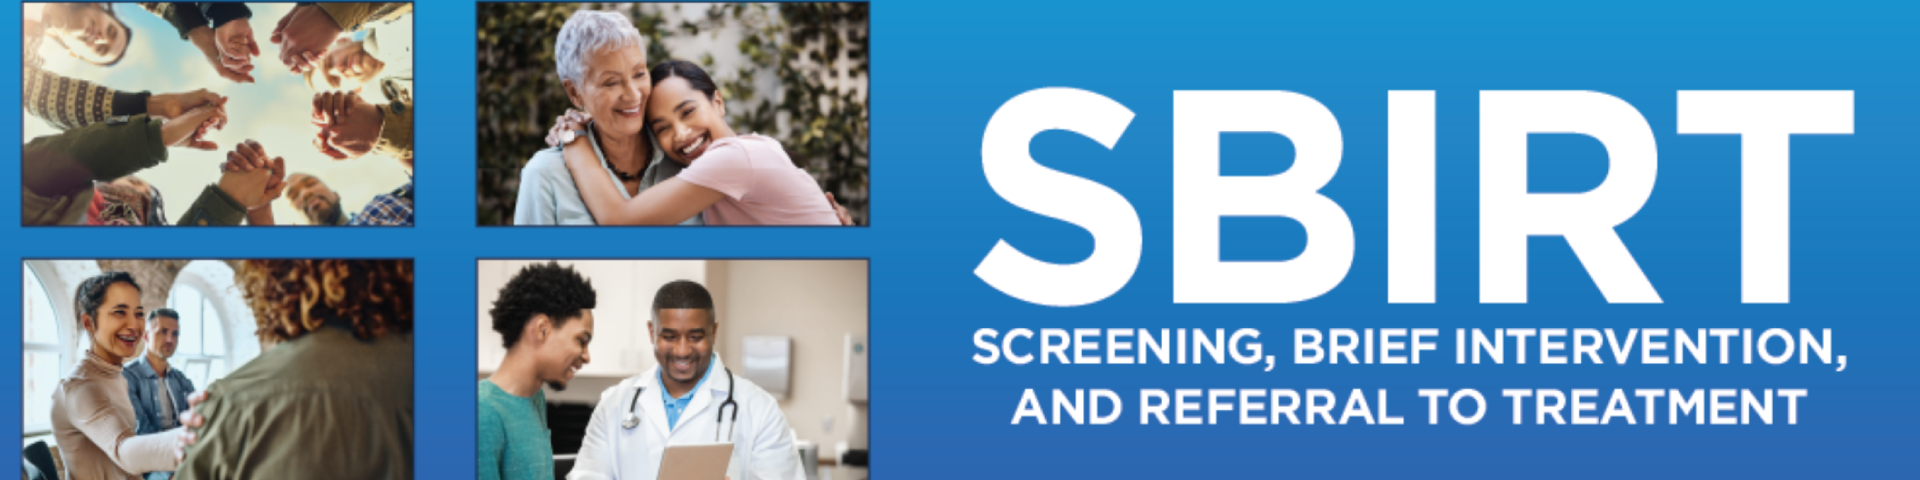 Screening, Brief Intervention, and Referral to Treatment (SBIRT)